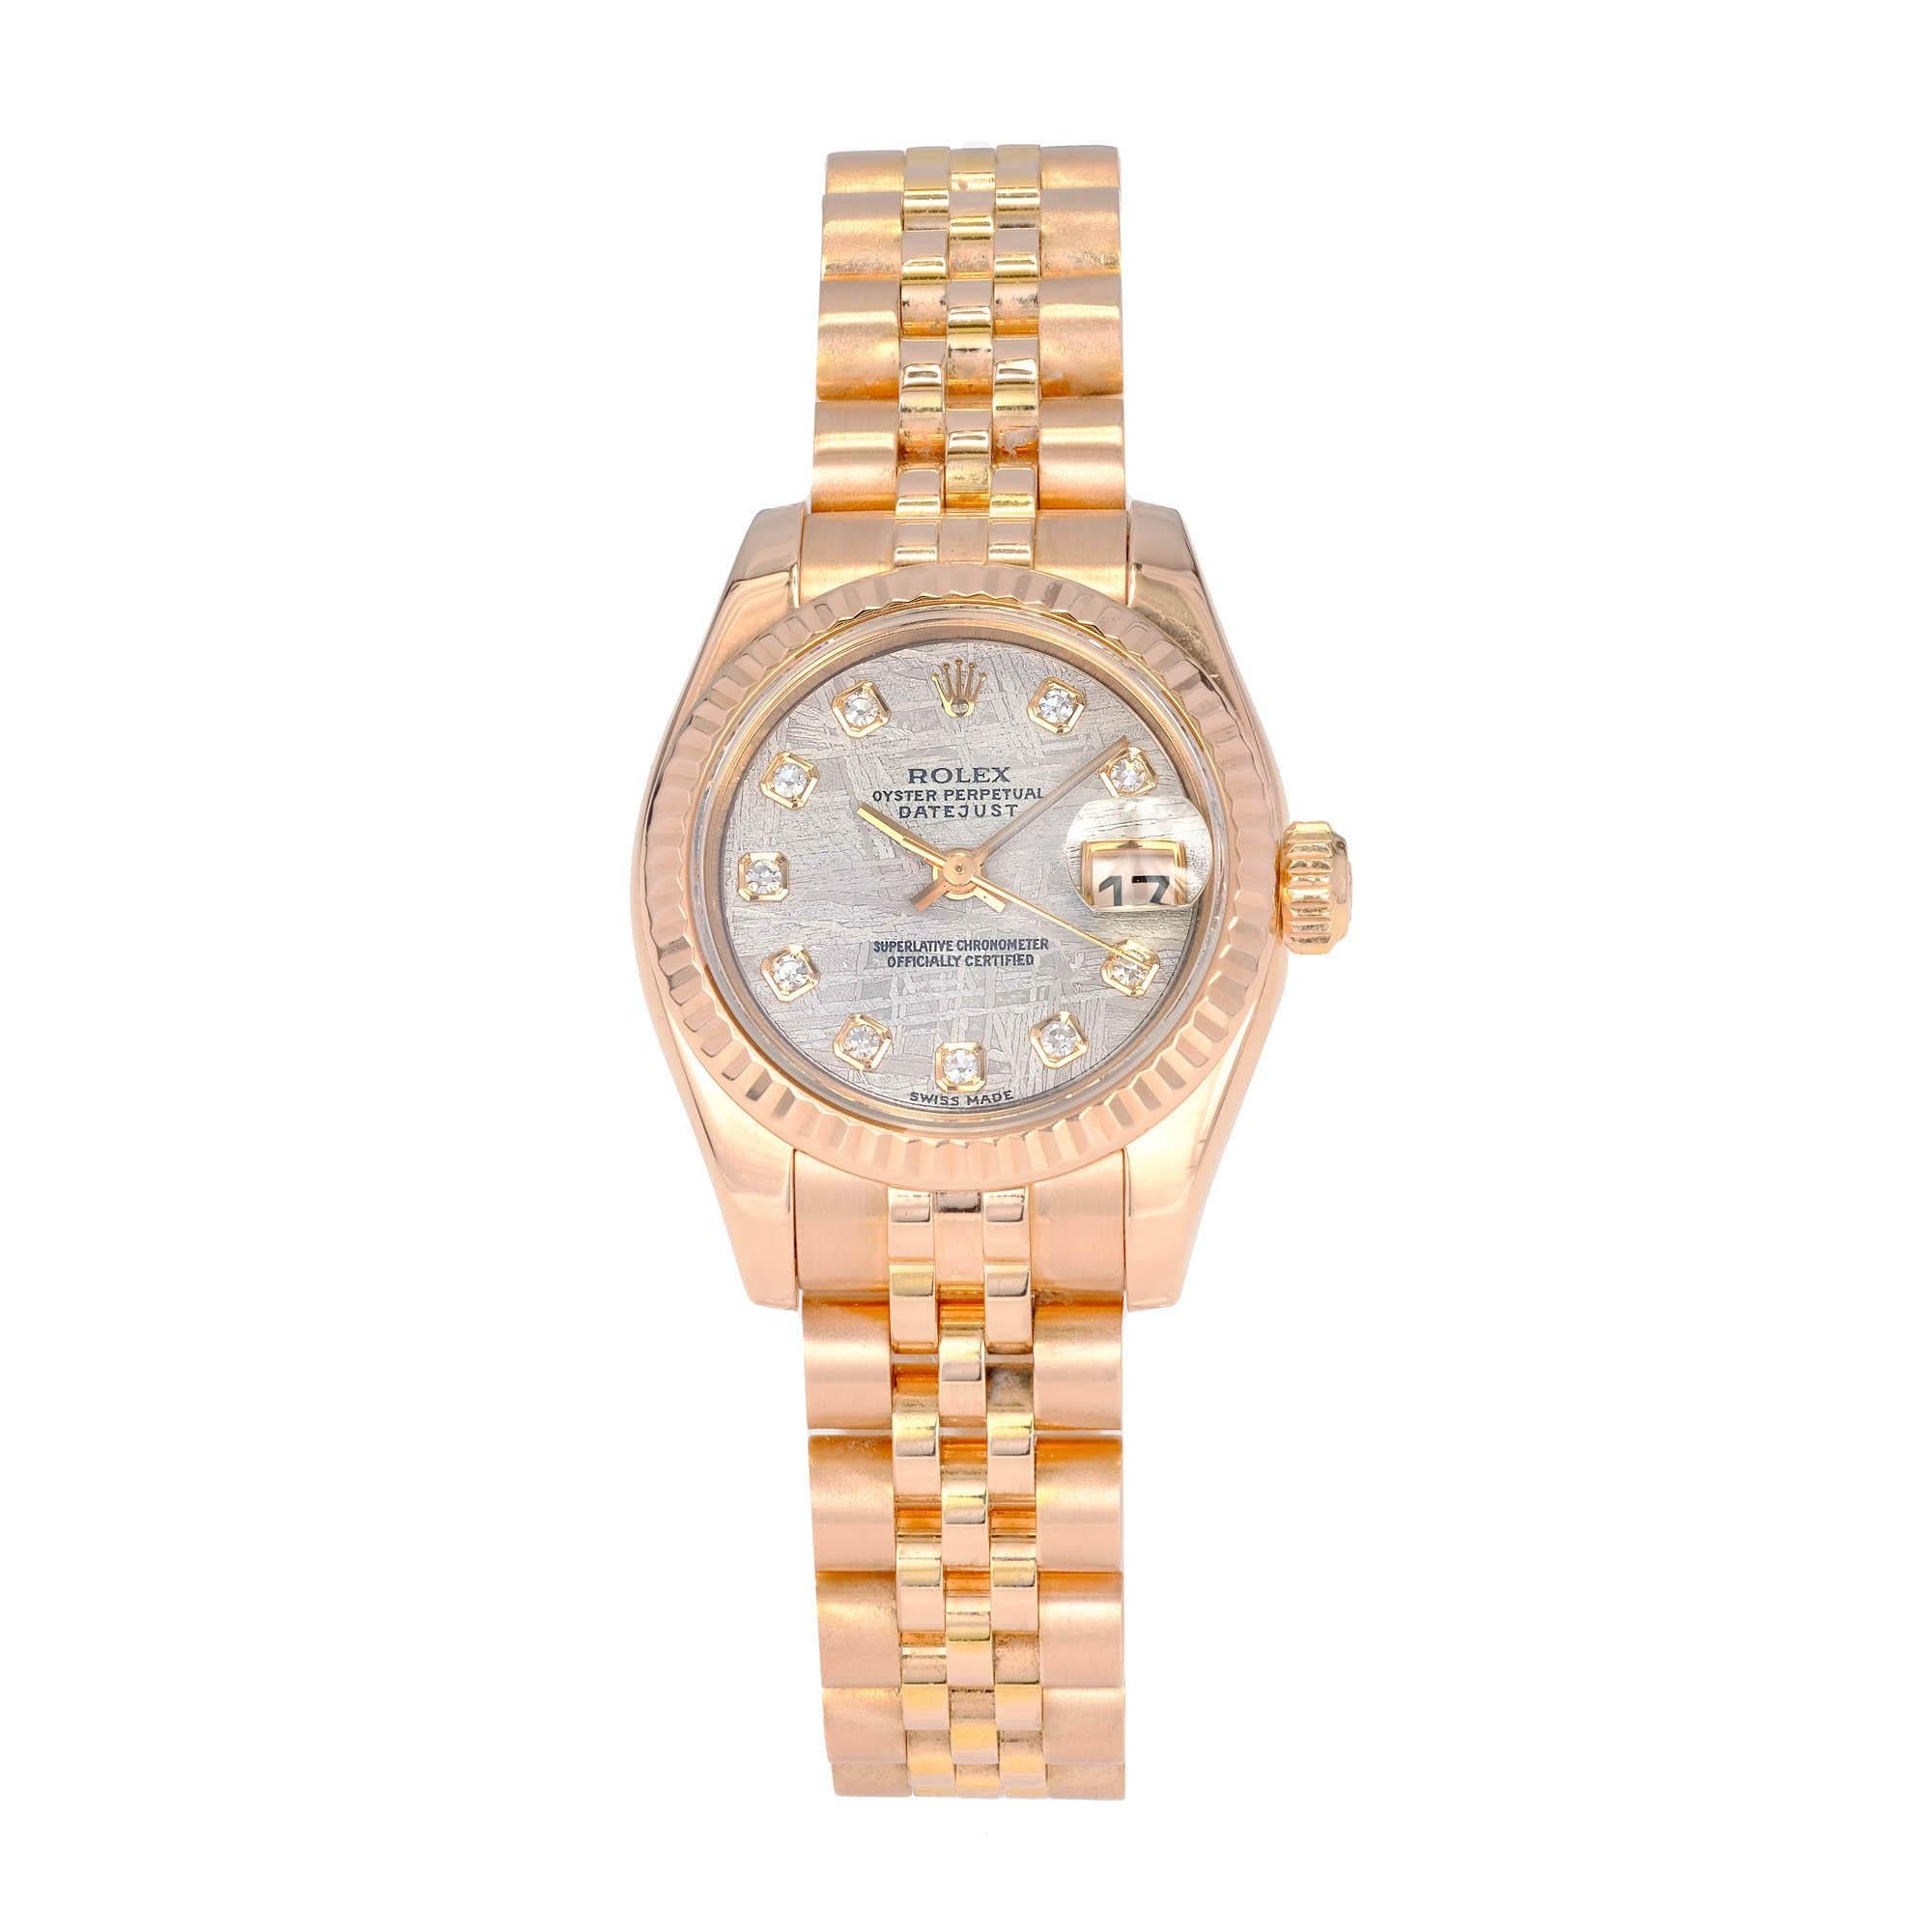 18k rose gold ladies datejust Rolex with fluted bezel. Metorite dial with diamonds.

Length: 7 inches
Width: 26mm
Band Width at Case: 12.5mm
Band: 18k rose gold jubilee
Crystal: sapphire
Dial: meteorite dial with 10 diamonds
Case: 18k rose gold with